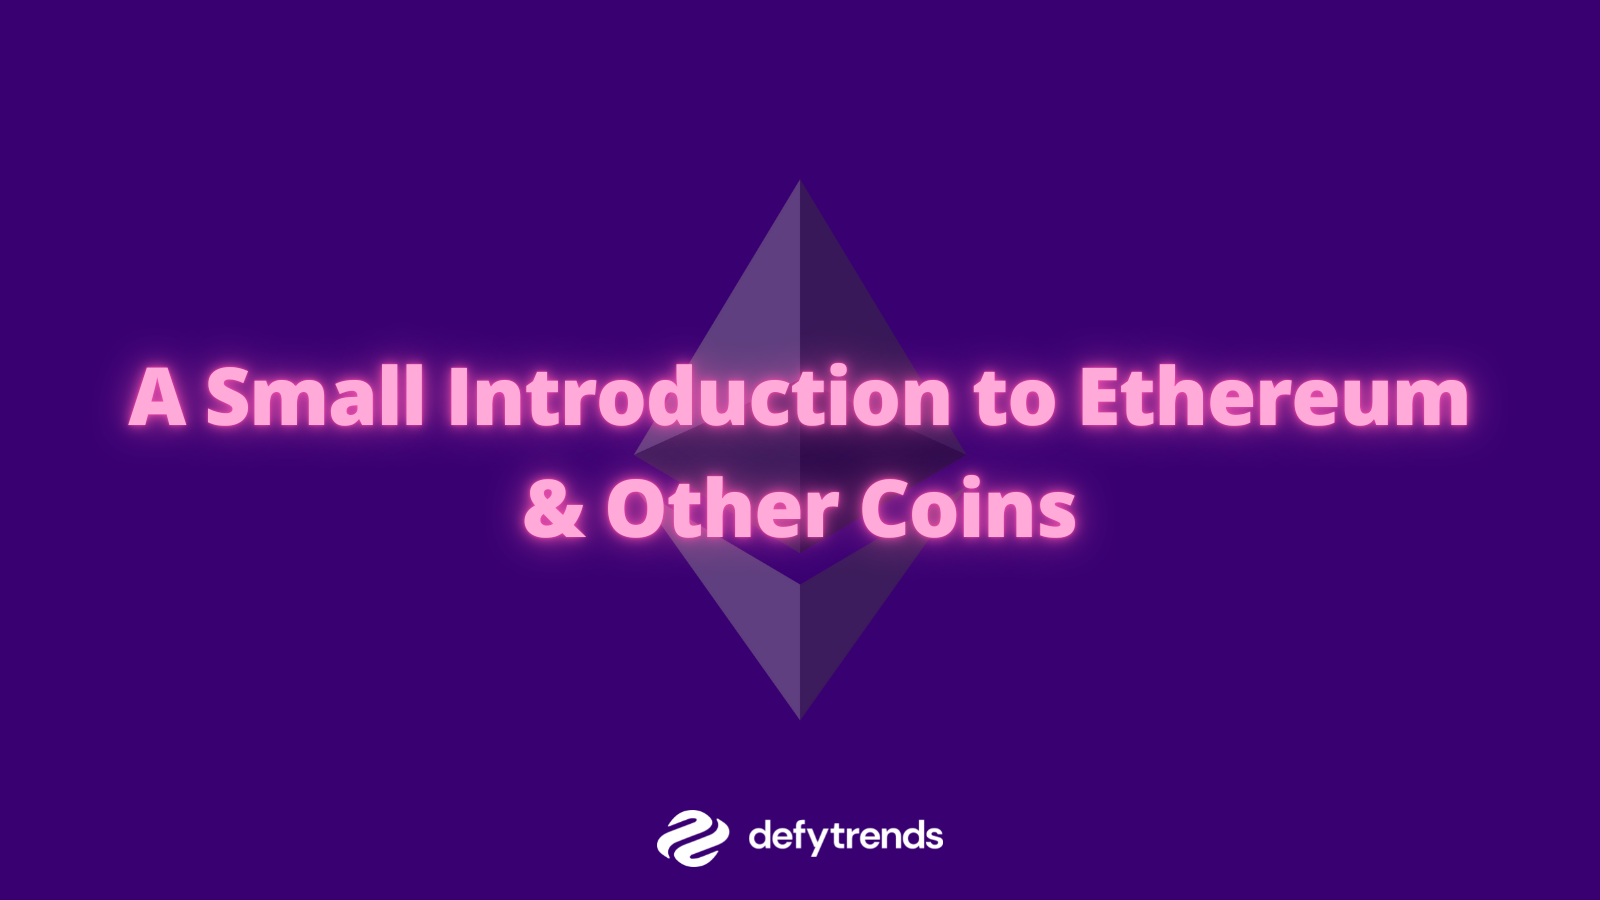 A Small Introduction to Ethereum & Other Coins